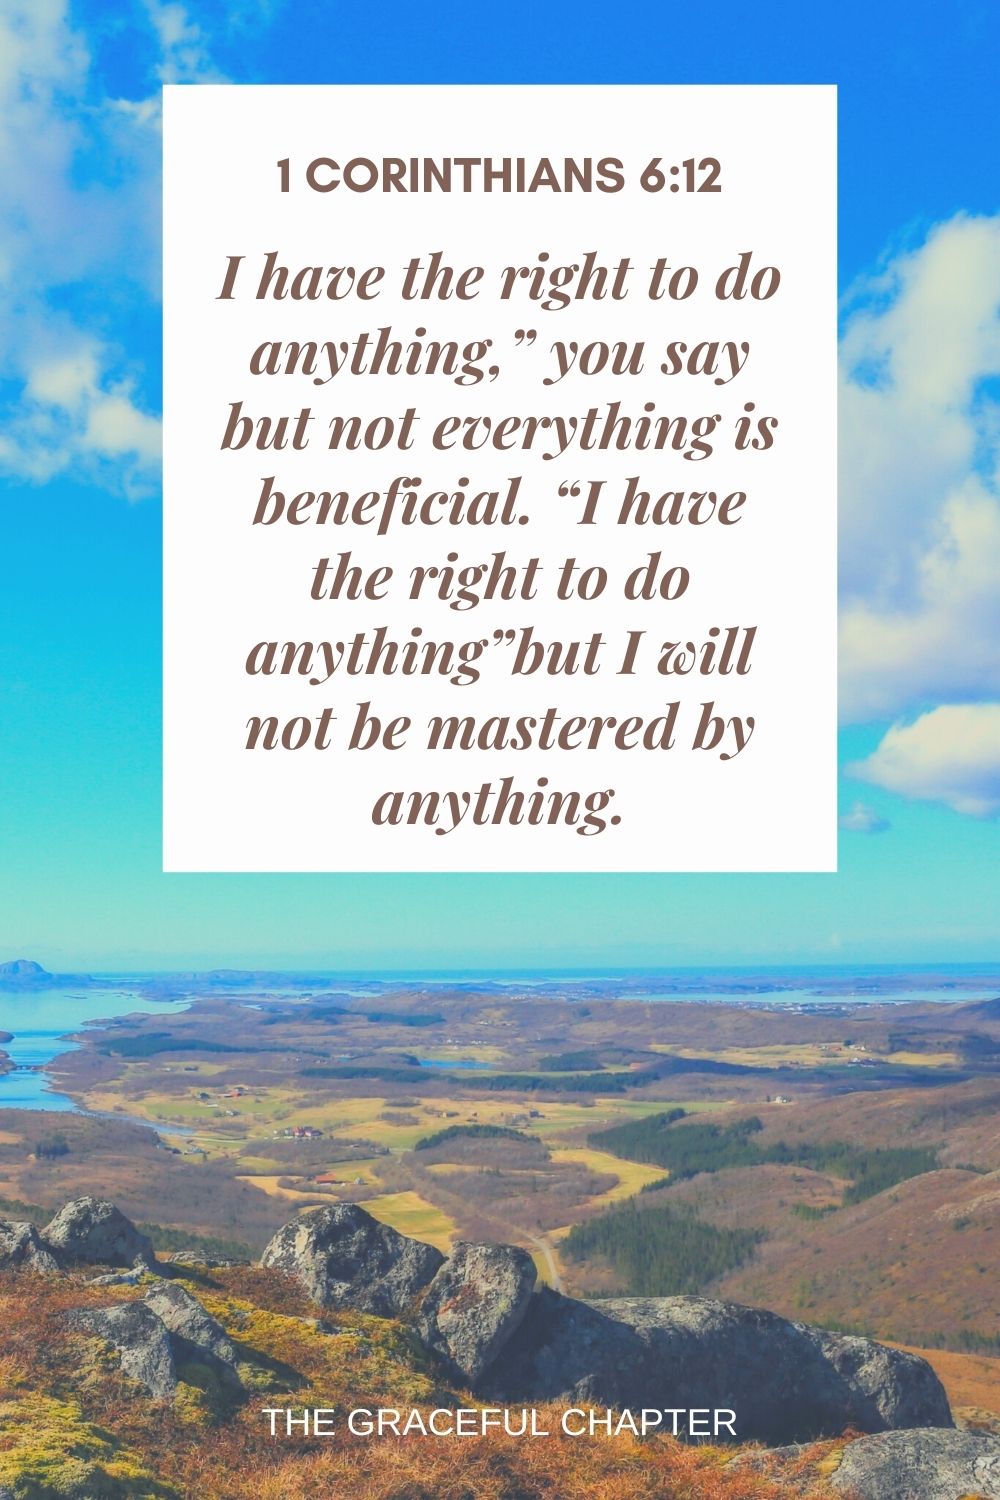 I have the right to do anything,” you say but not everything is beneficial. “I have the right to do anything”but I will not be mastered by anything. I have the right to do anything,” you say but not everything is beneficial. “I have the right to do anything”but I will not be mastered by anything. 1 Corinthians 6:12